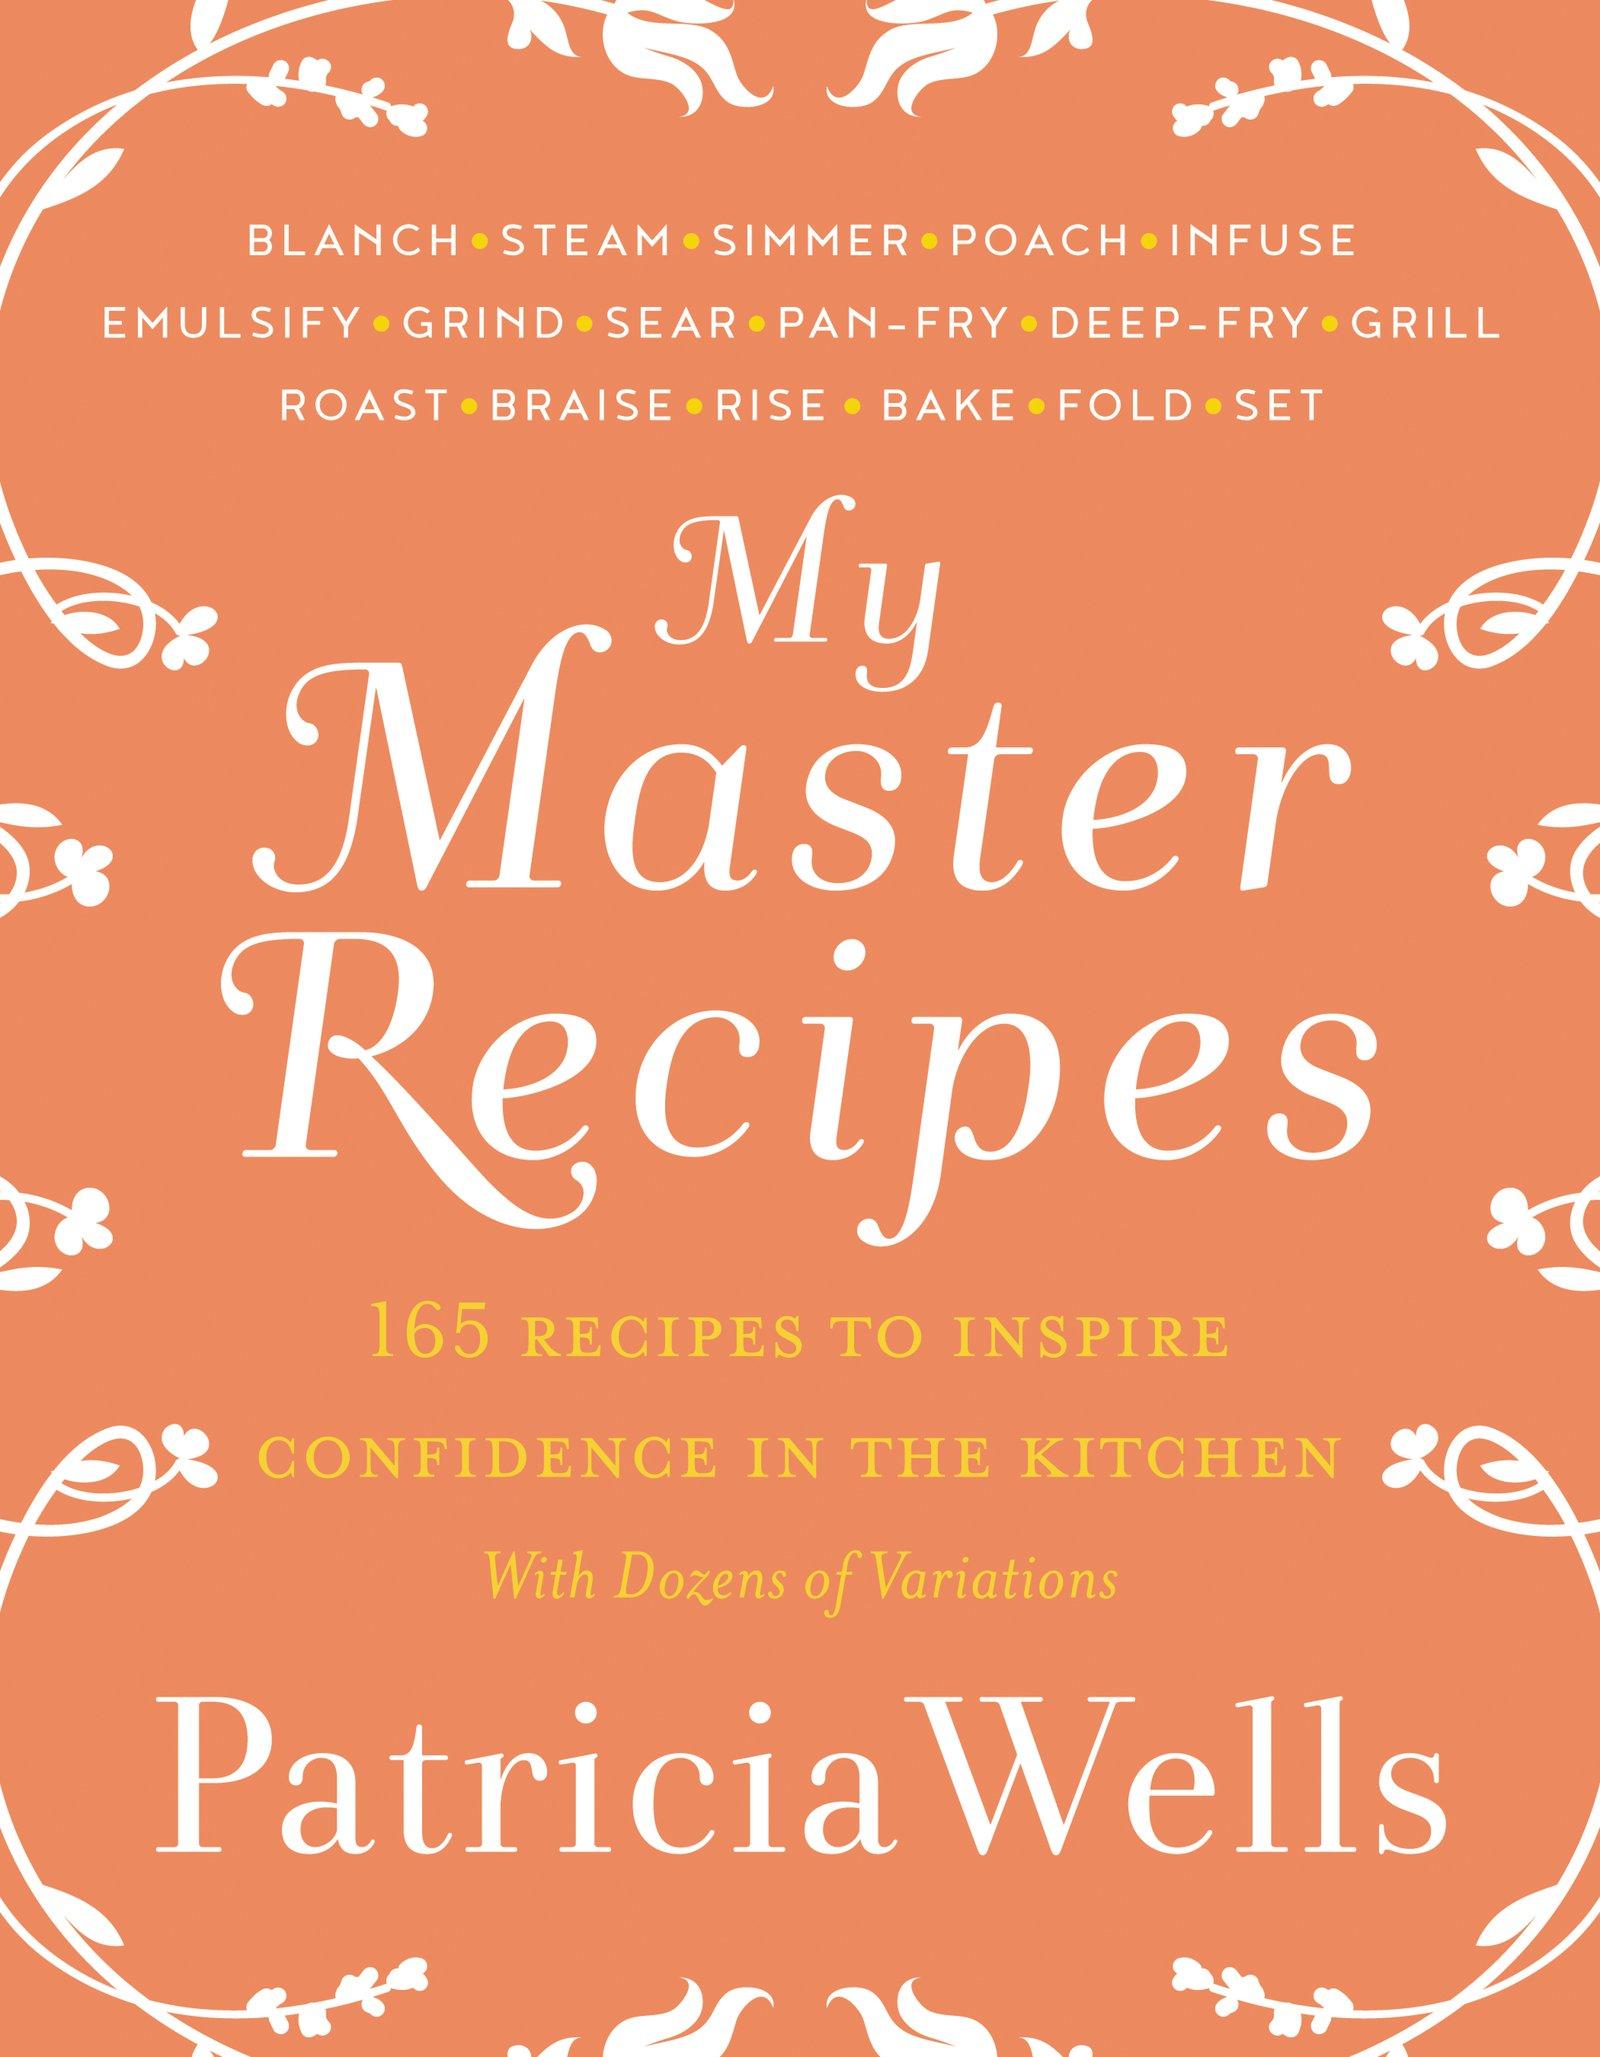 Book Review: "My Master Recipes" By Patricia Wells | WVXU